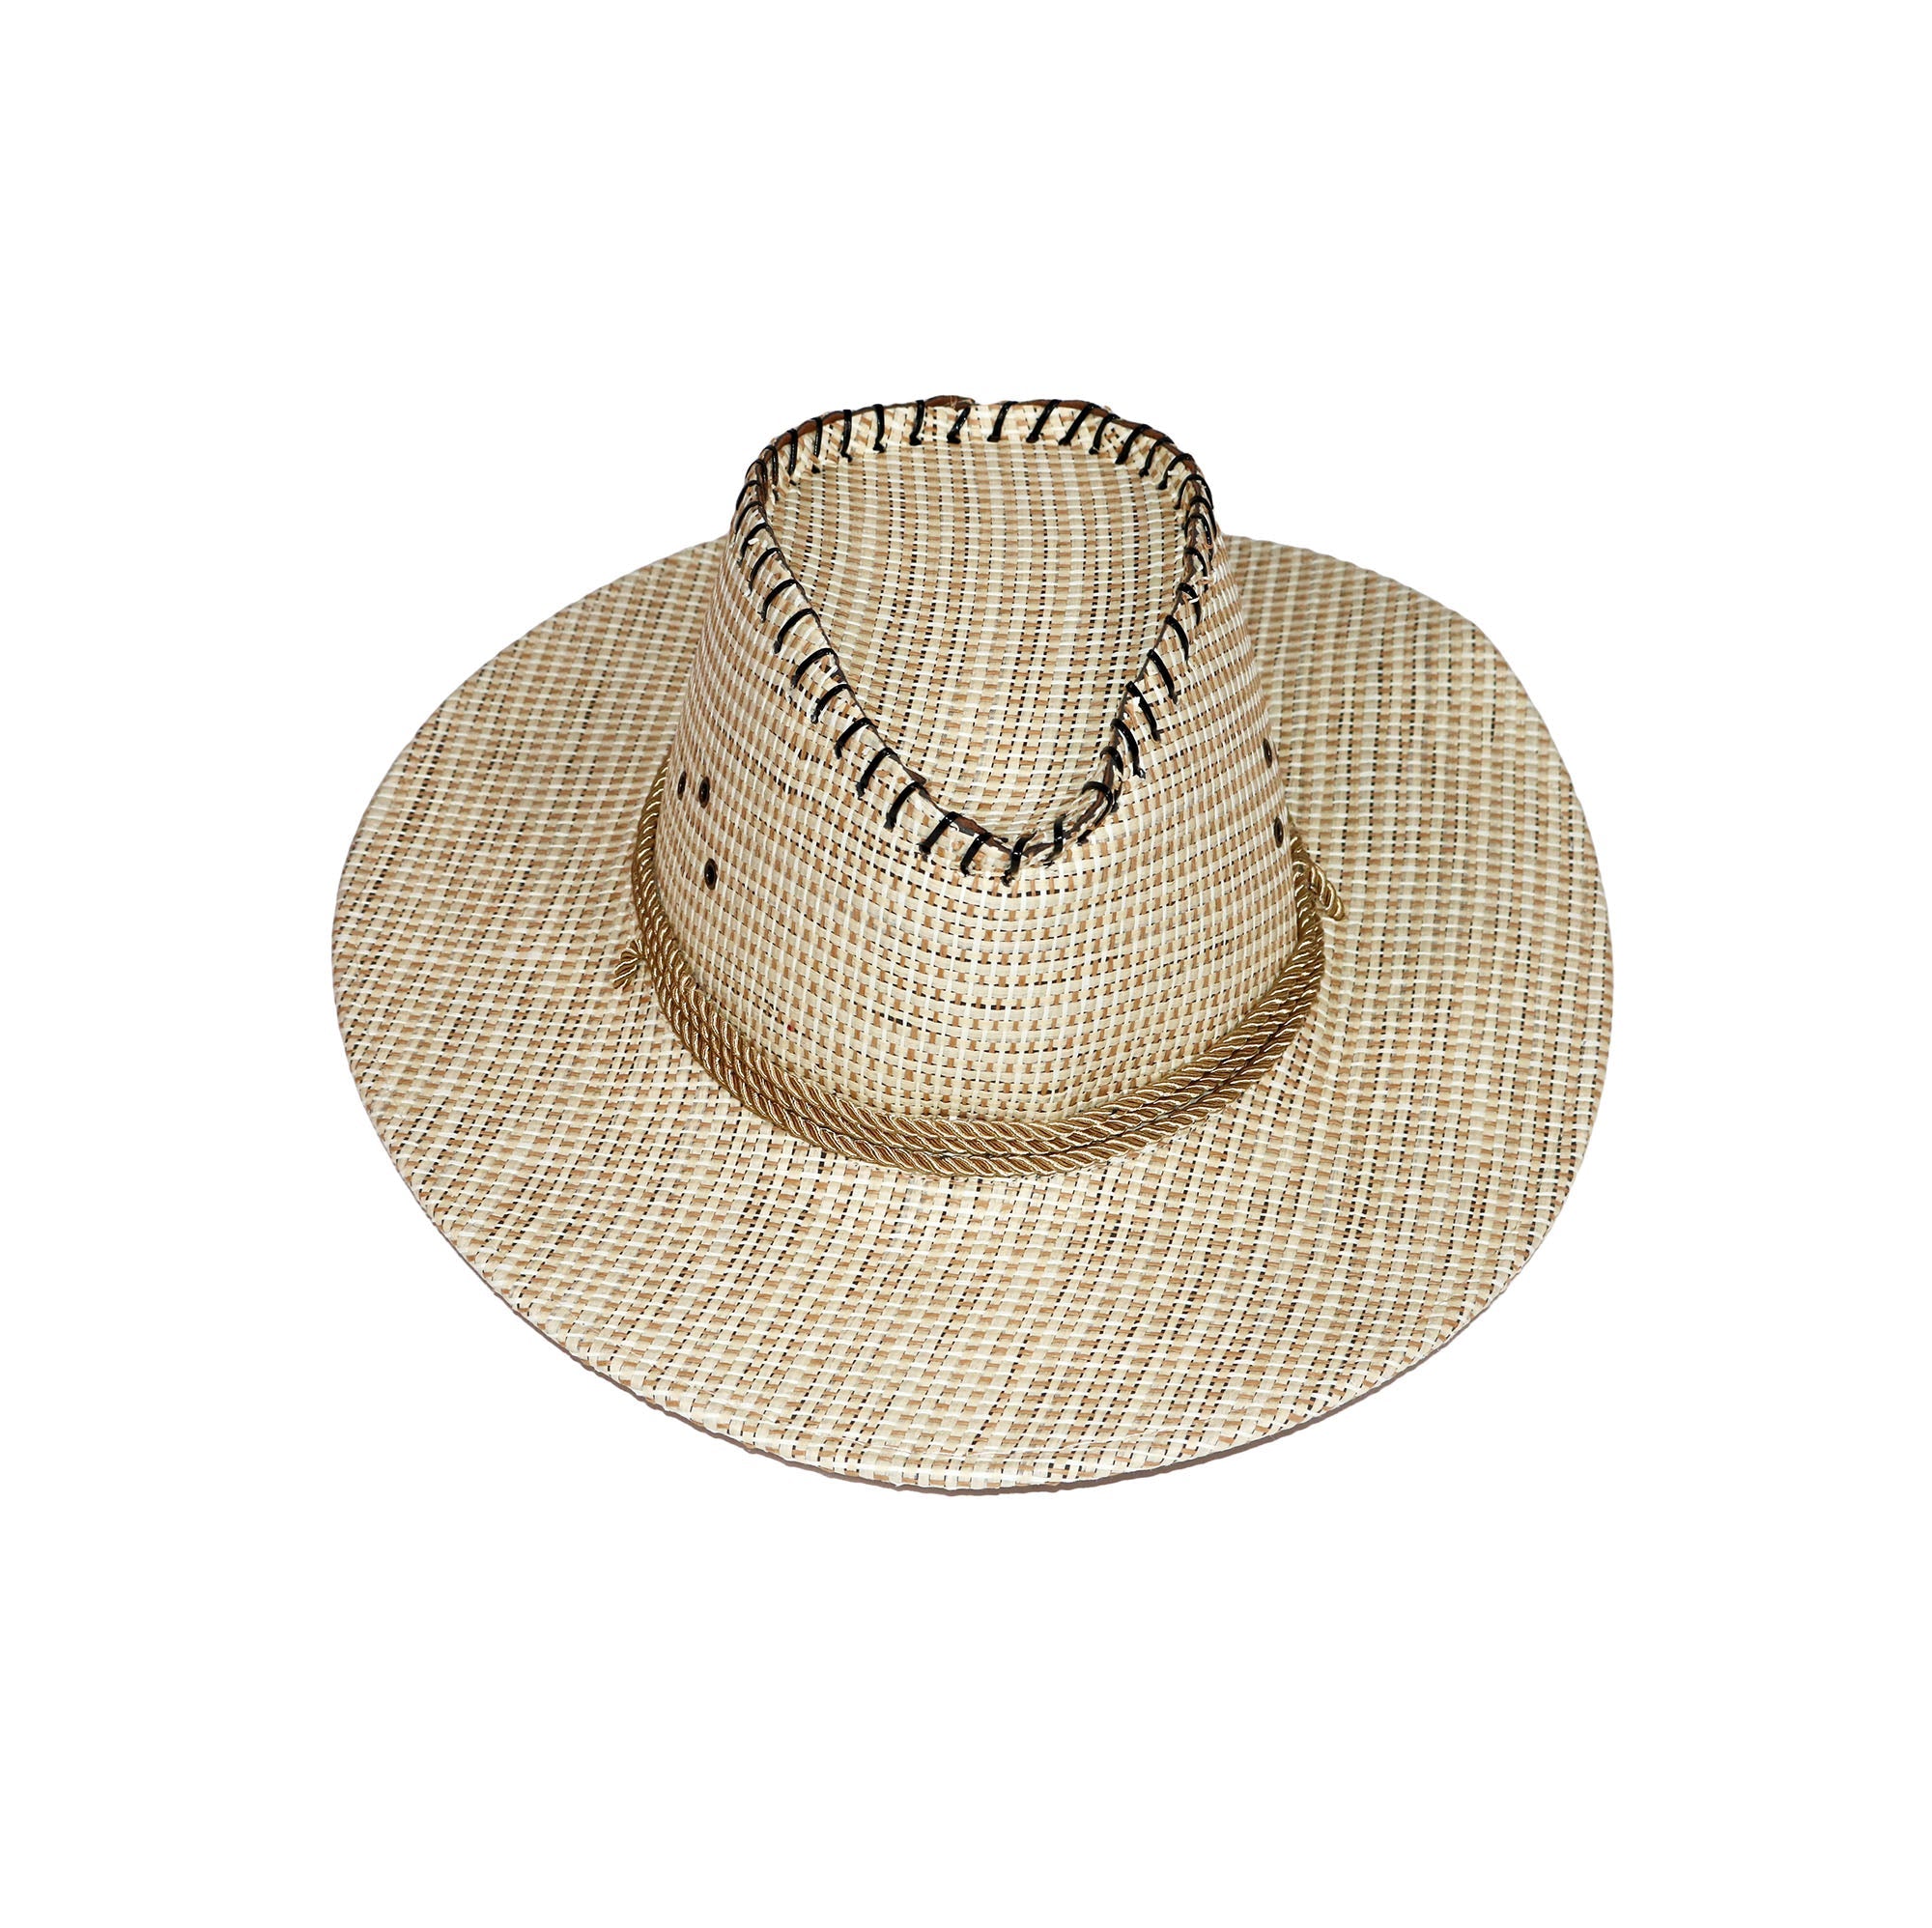 Wide Brim Woven Hat Brown and Tan